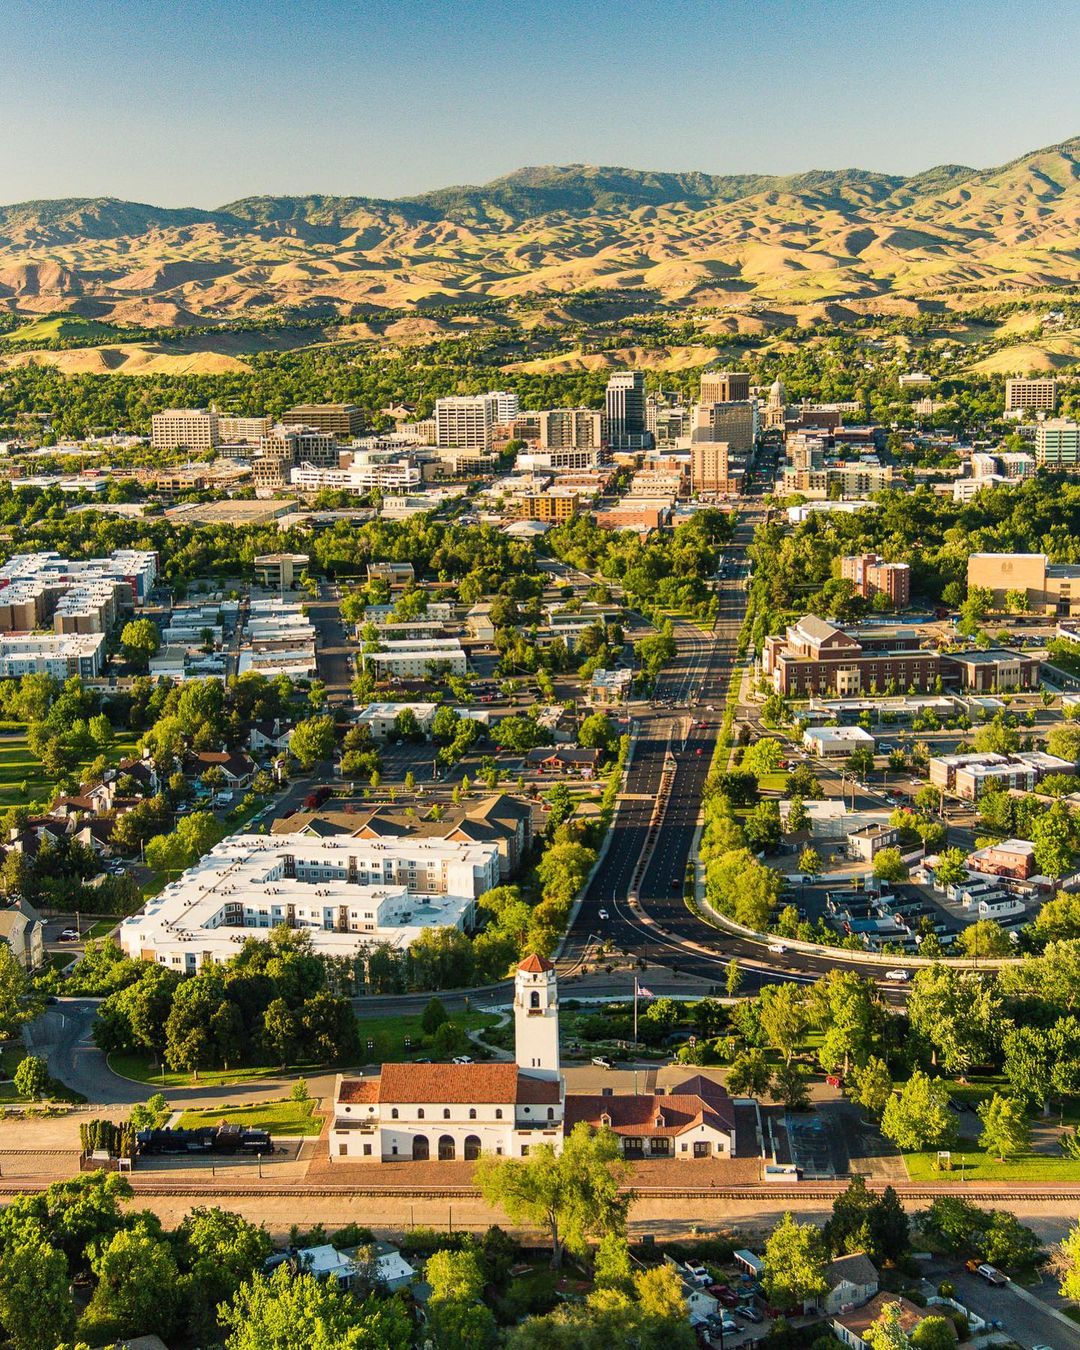 Drone Photo of Boise, ID at Golden Hour with the Mountains in the Background. Photo by Instagram user @chadcasephotovideo